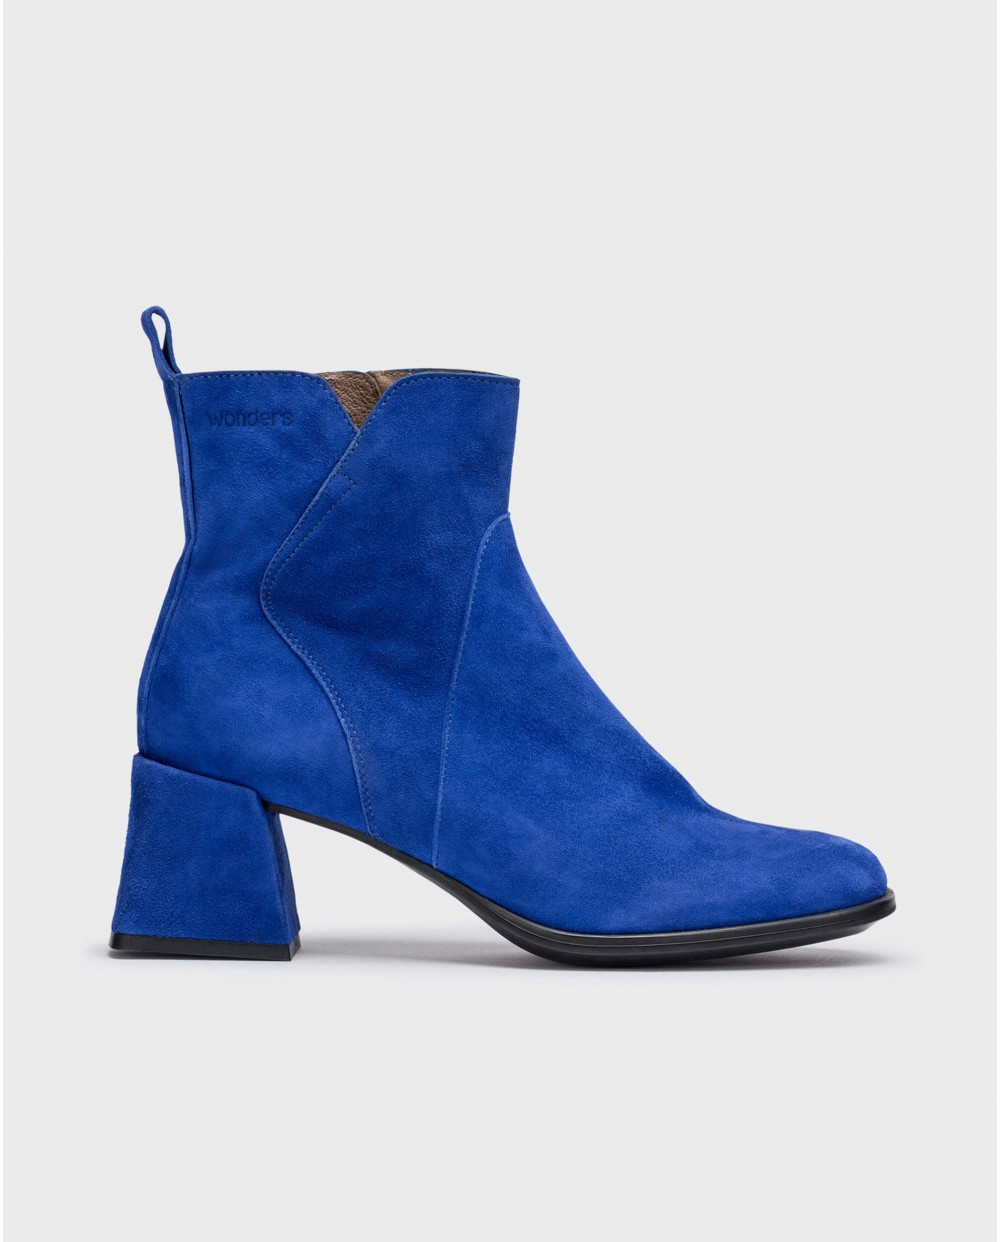 Blue MARINE ankle boot